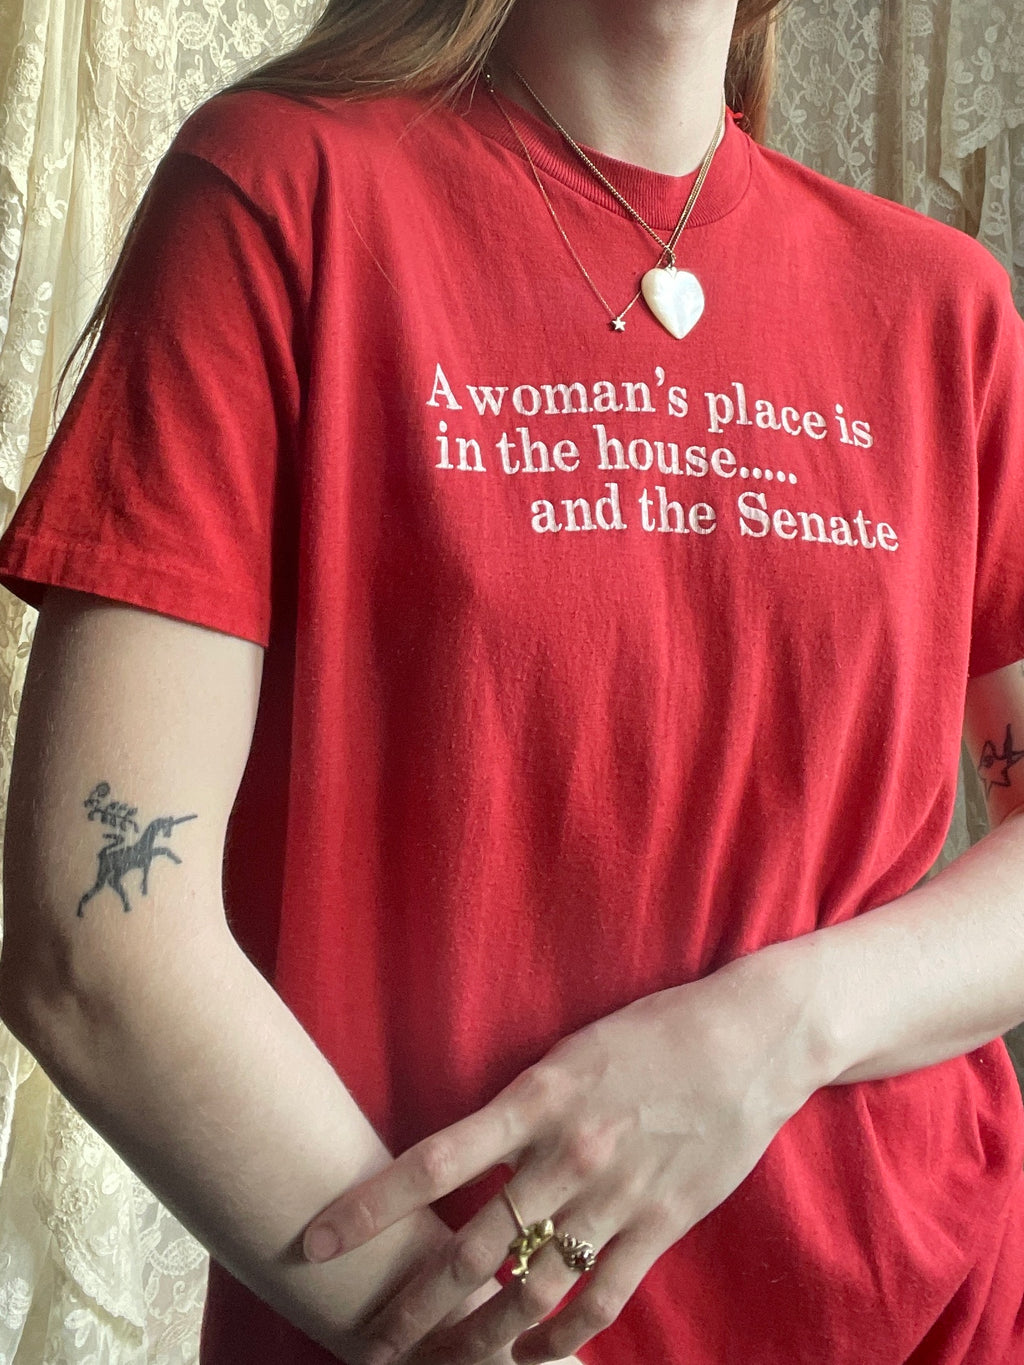 1970s A Woman’s Place Red Tee Shirt Short Sleeve